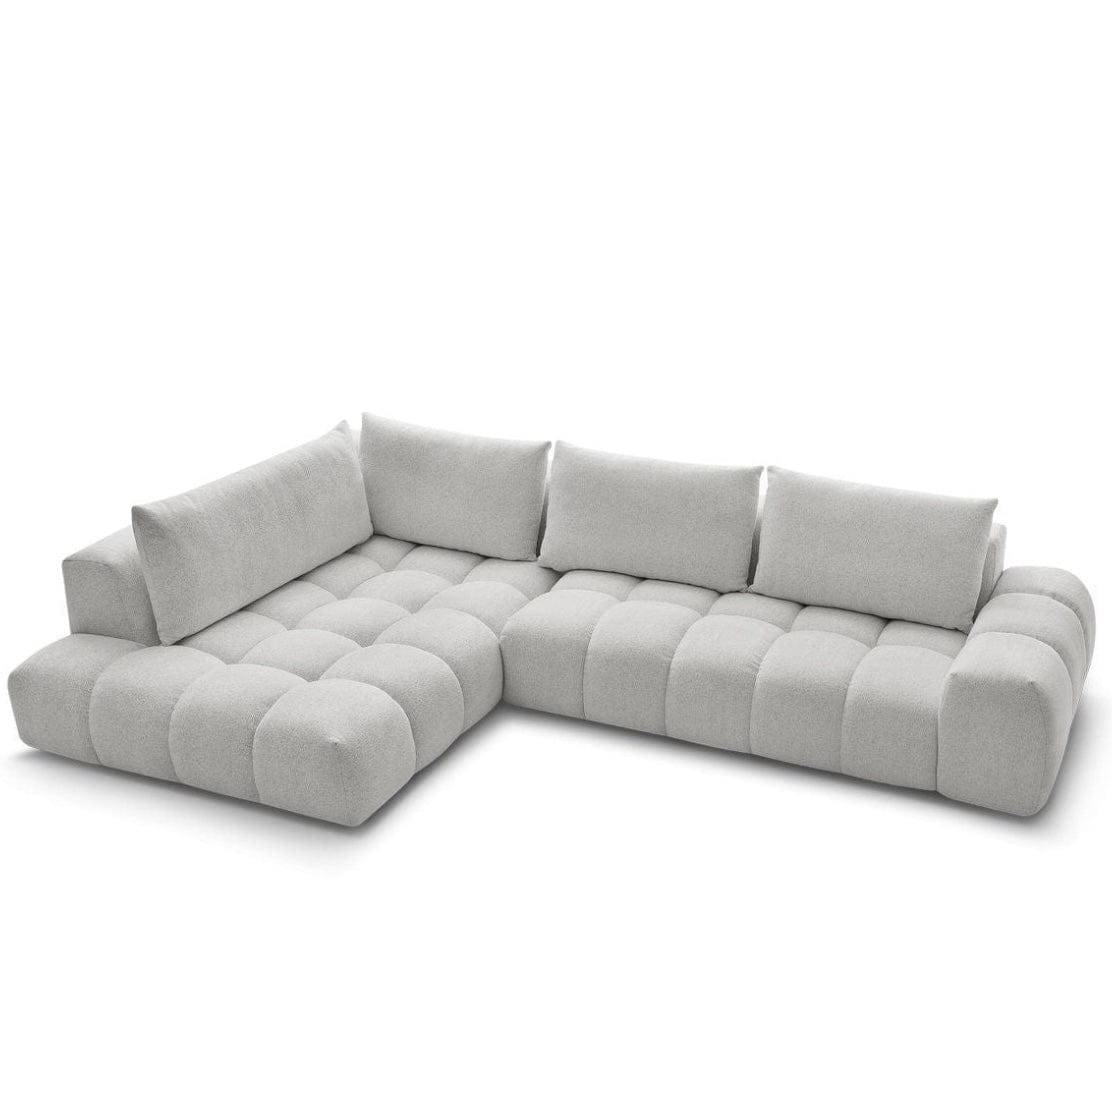 Home Atelier Alpine Sectional Sofa with Tufted Cushioning